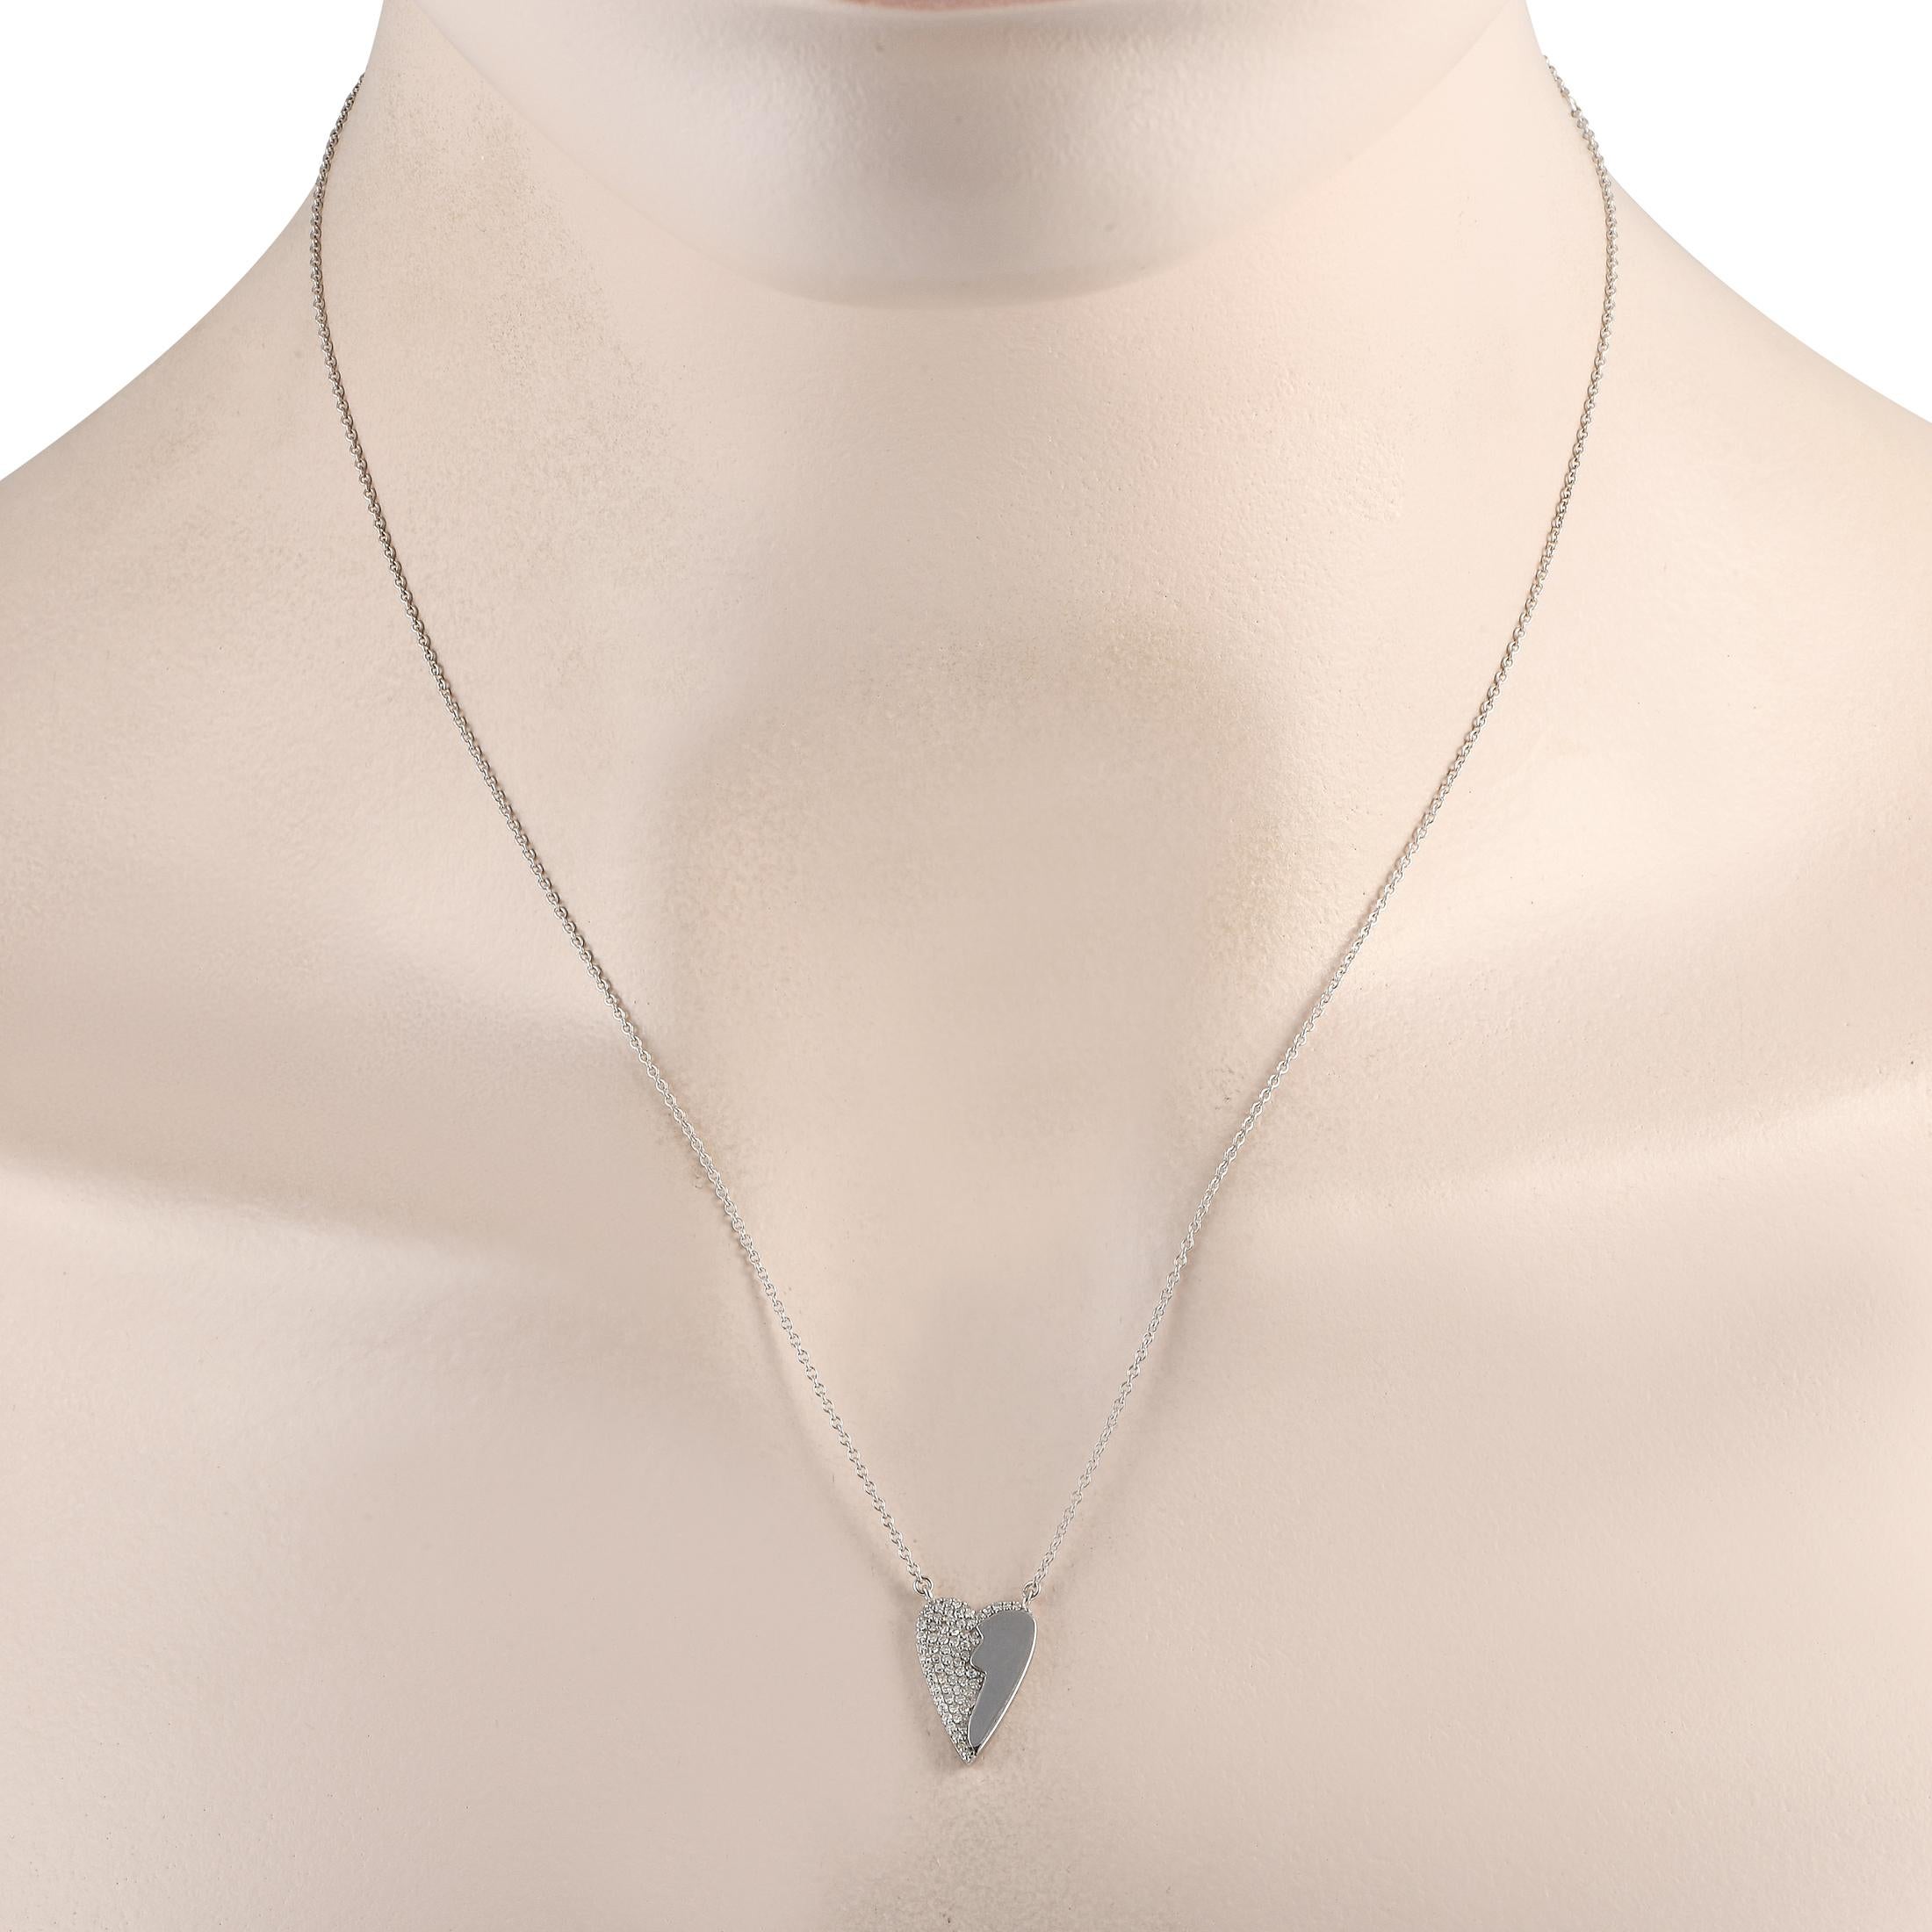 This sophisticated necklace is ideal for everyday wear. Sleek 14K White Gold contrasts beautifully against inset Diamonds with a total weight of 0.16 carats on this pieces pendant, which measures 0.65 long by 0.45 wide and is suspended from an 18